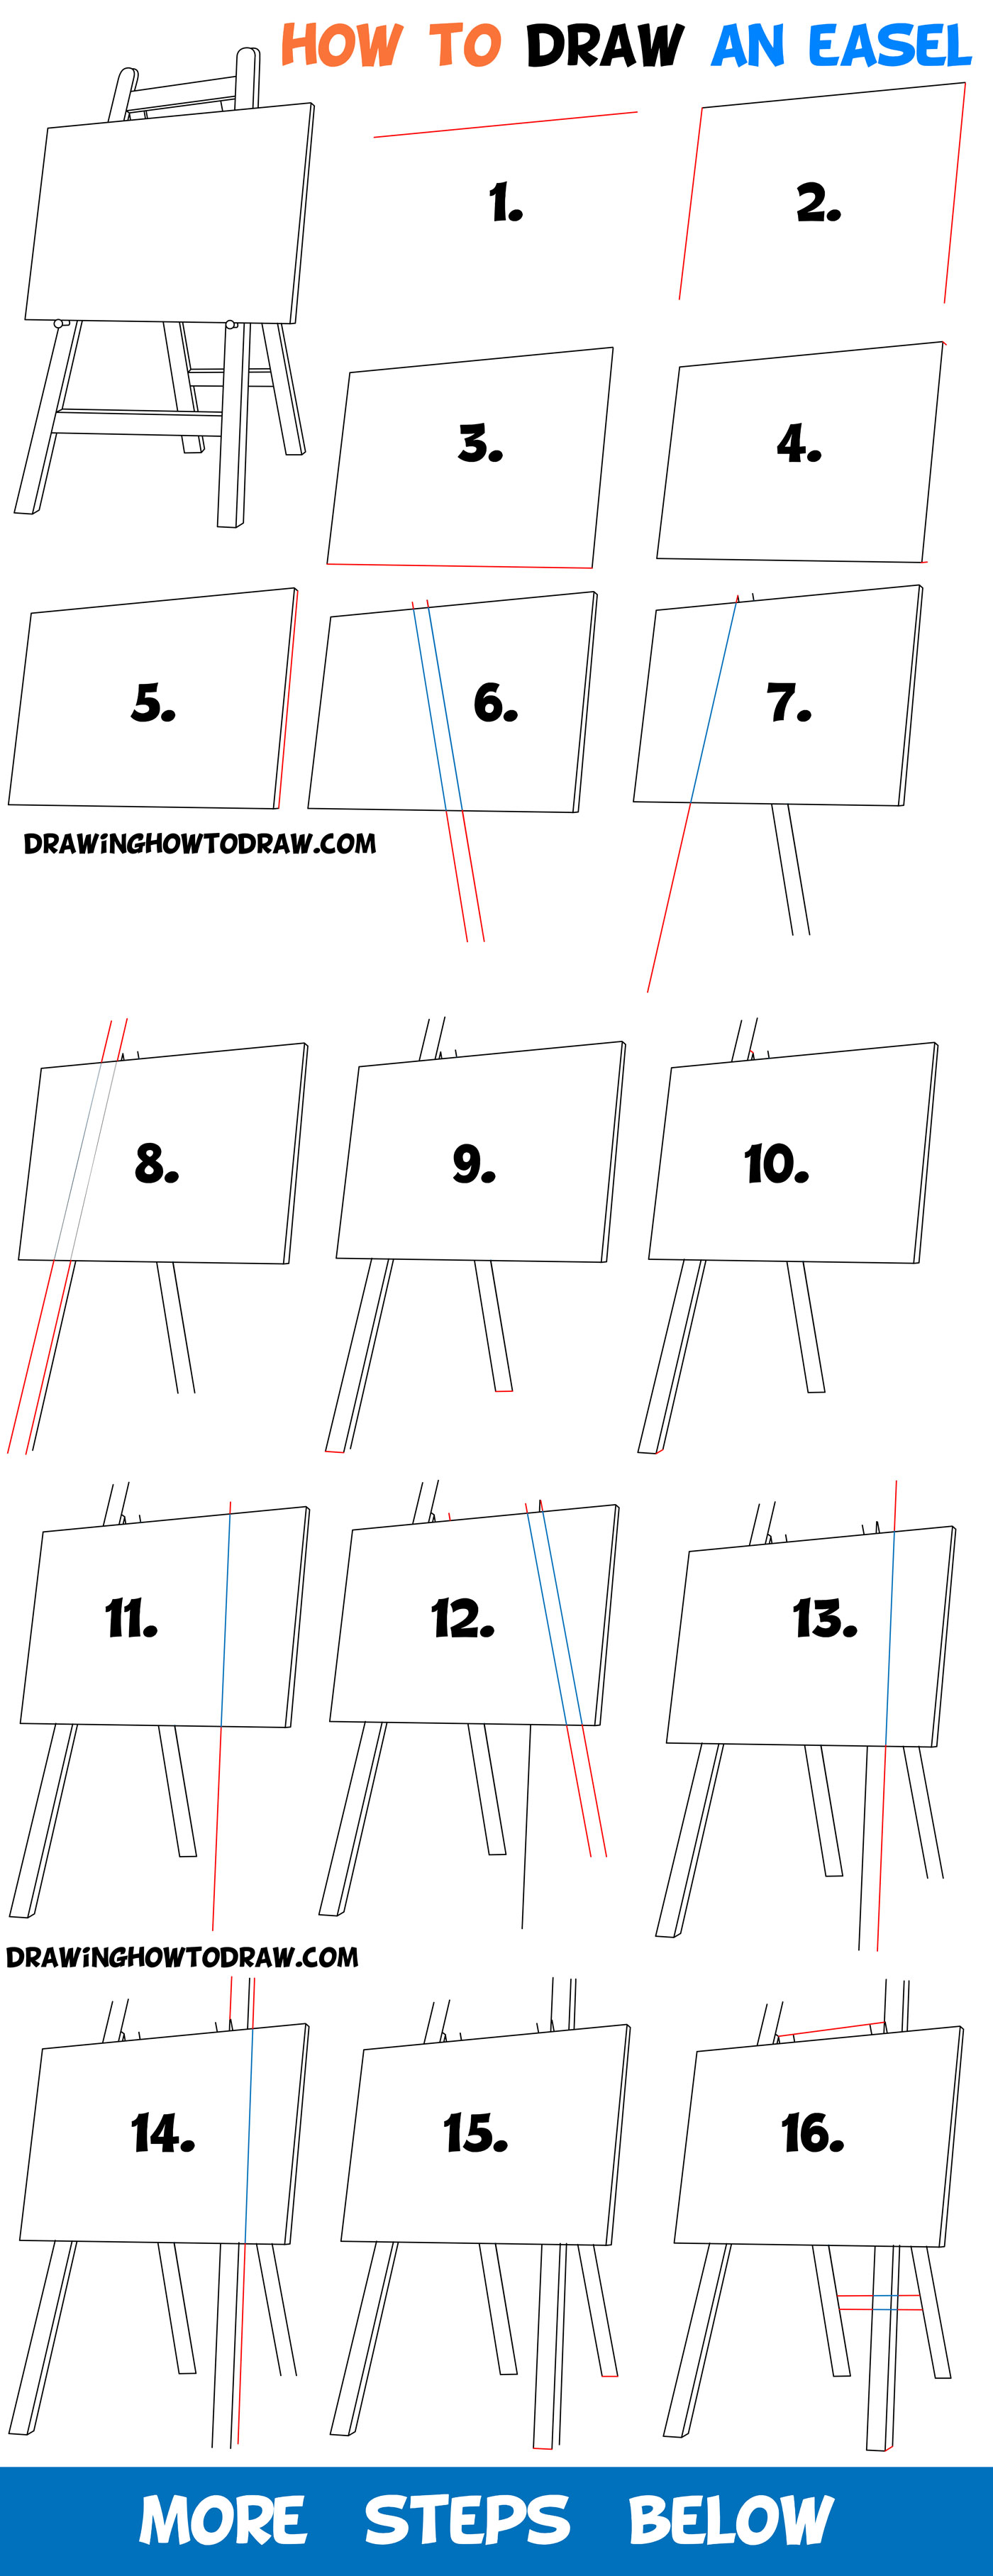 How to Draw an Easel - Easy Step by Step Drawing Tutorial for Beginners -  How to Draw Step by Step Drawing Tutorials